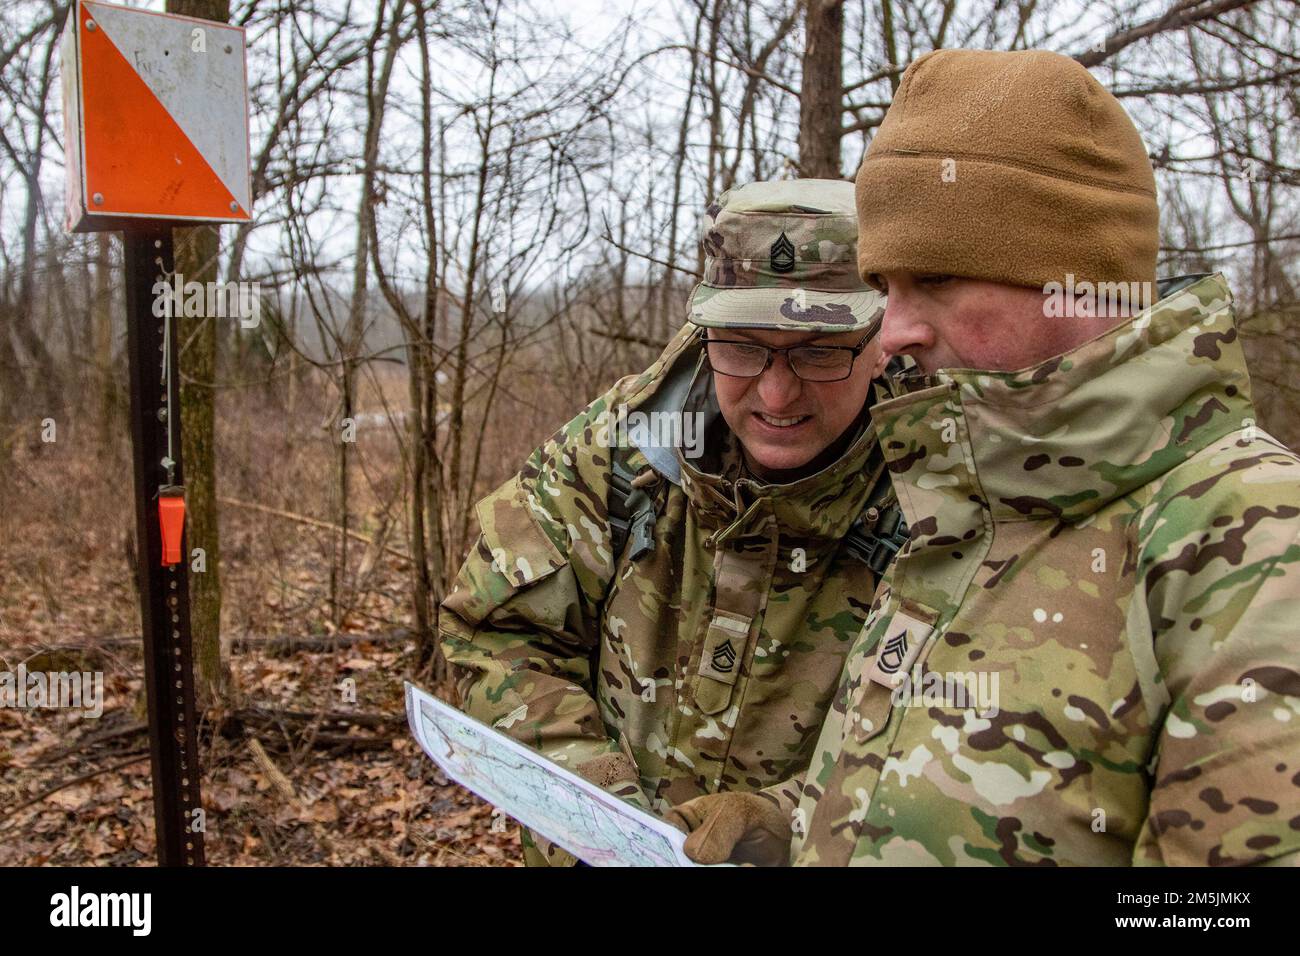 U.S. Army Sgt. 1st Class Rodney Brough, right, and Sgt. 1st Class Larry May, left, both instructors with Company B, 4th Battalion, 399th Regiment, look at their next point on the map after successfully locating one during land navigation training March 19, 2022, on Fort Knox. Ky. Soldiers from 4th Bn., 399th Regt., who serve as Cadet Summer Training instructors, conducted land navigation refresher training before traversing the course to find their specified points during March Battle Assembly. Stock Photo